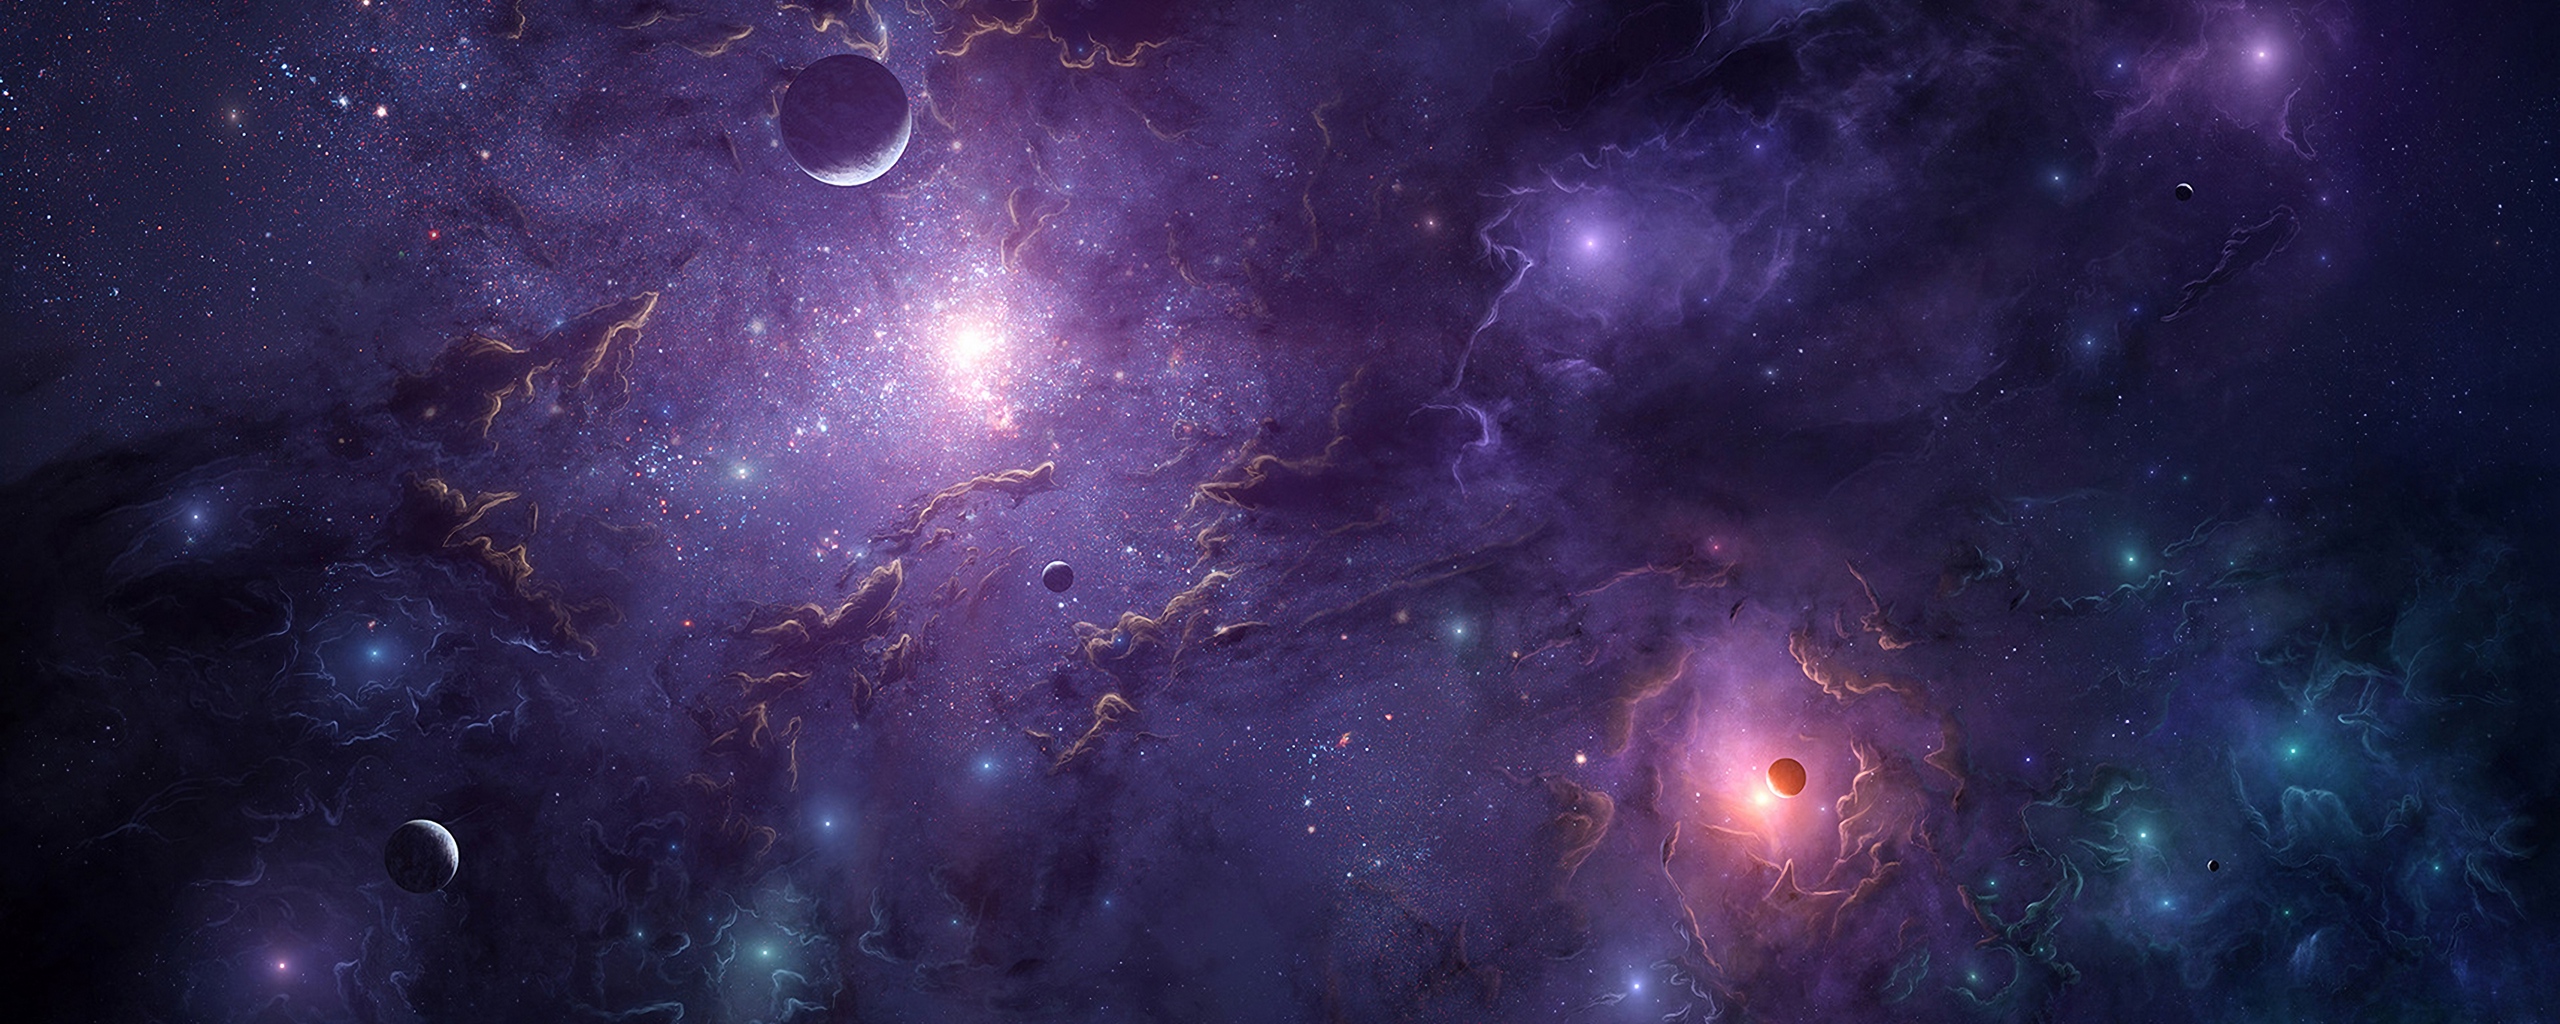 Wallpaper Space, Galaxy, Shine, Planets, Clouds, Stars - Space 2560 X 1080 - HD Wallpaper 